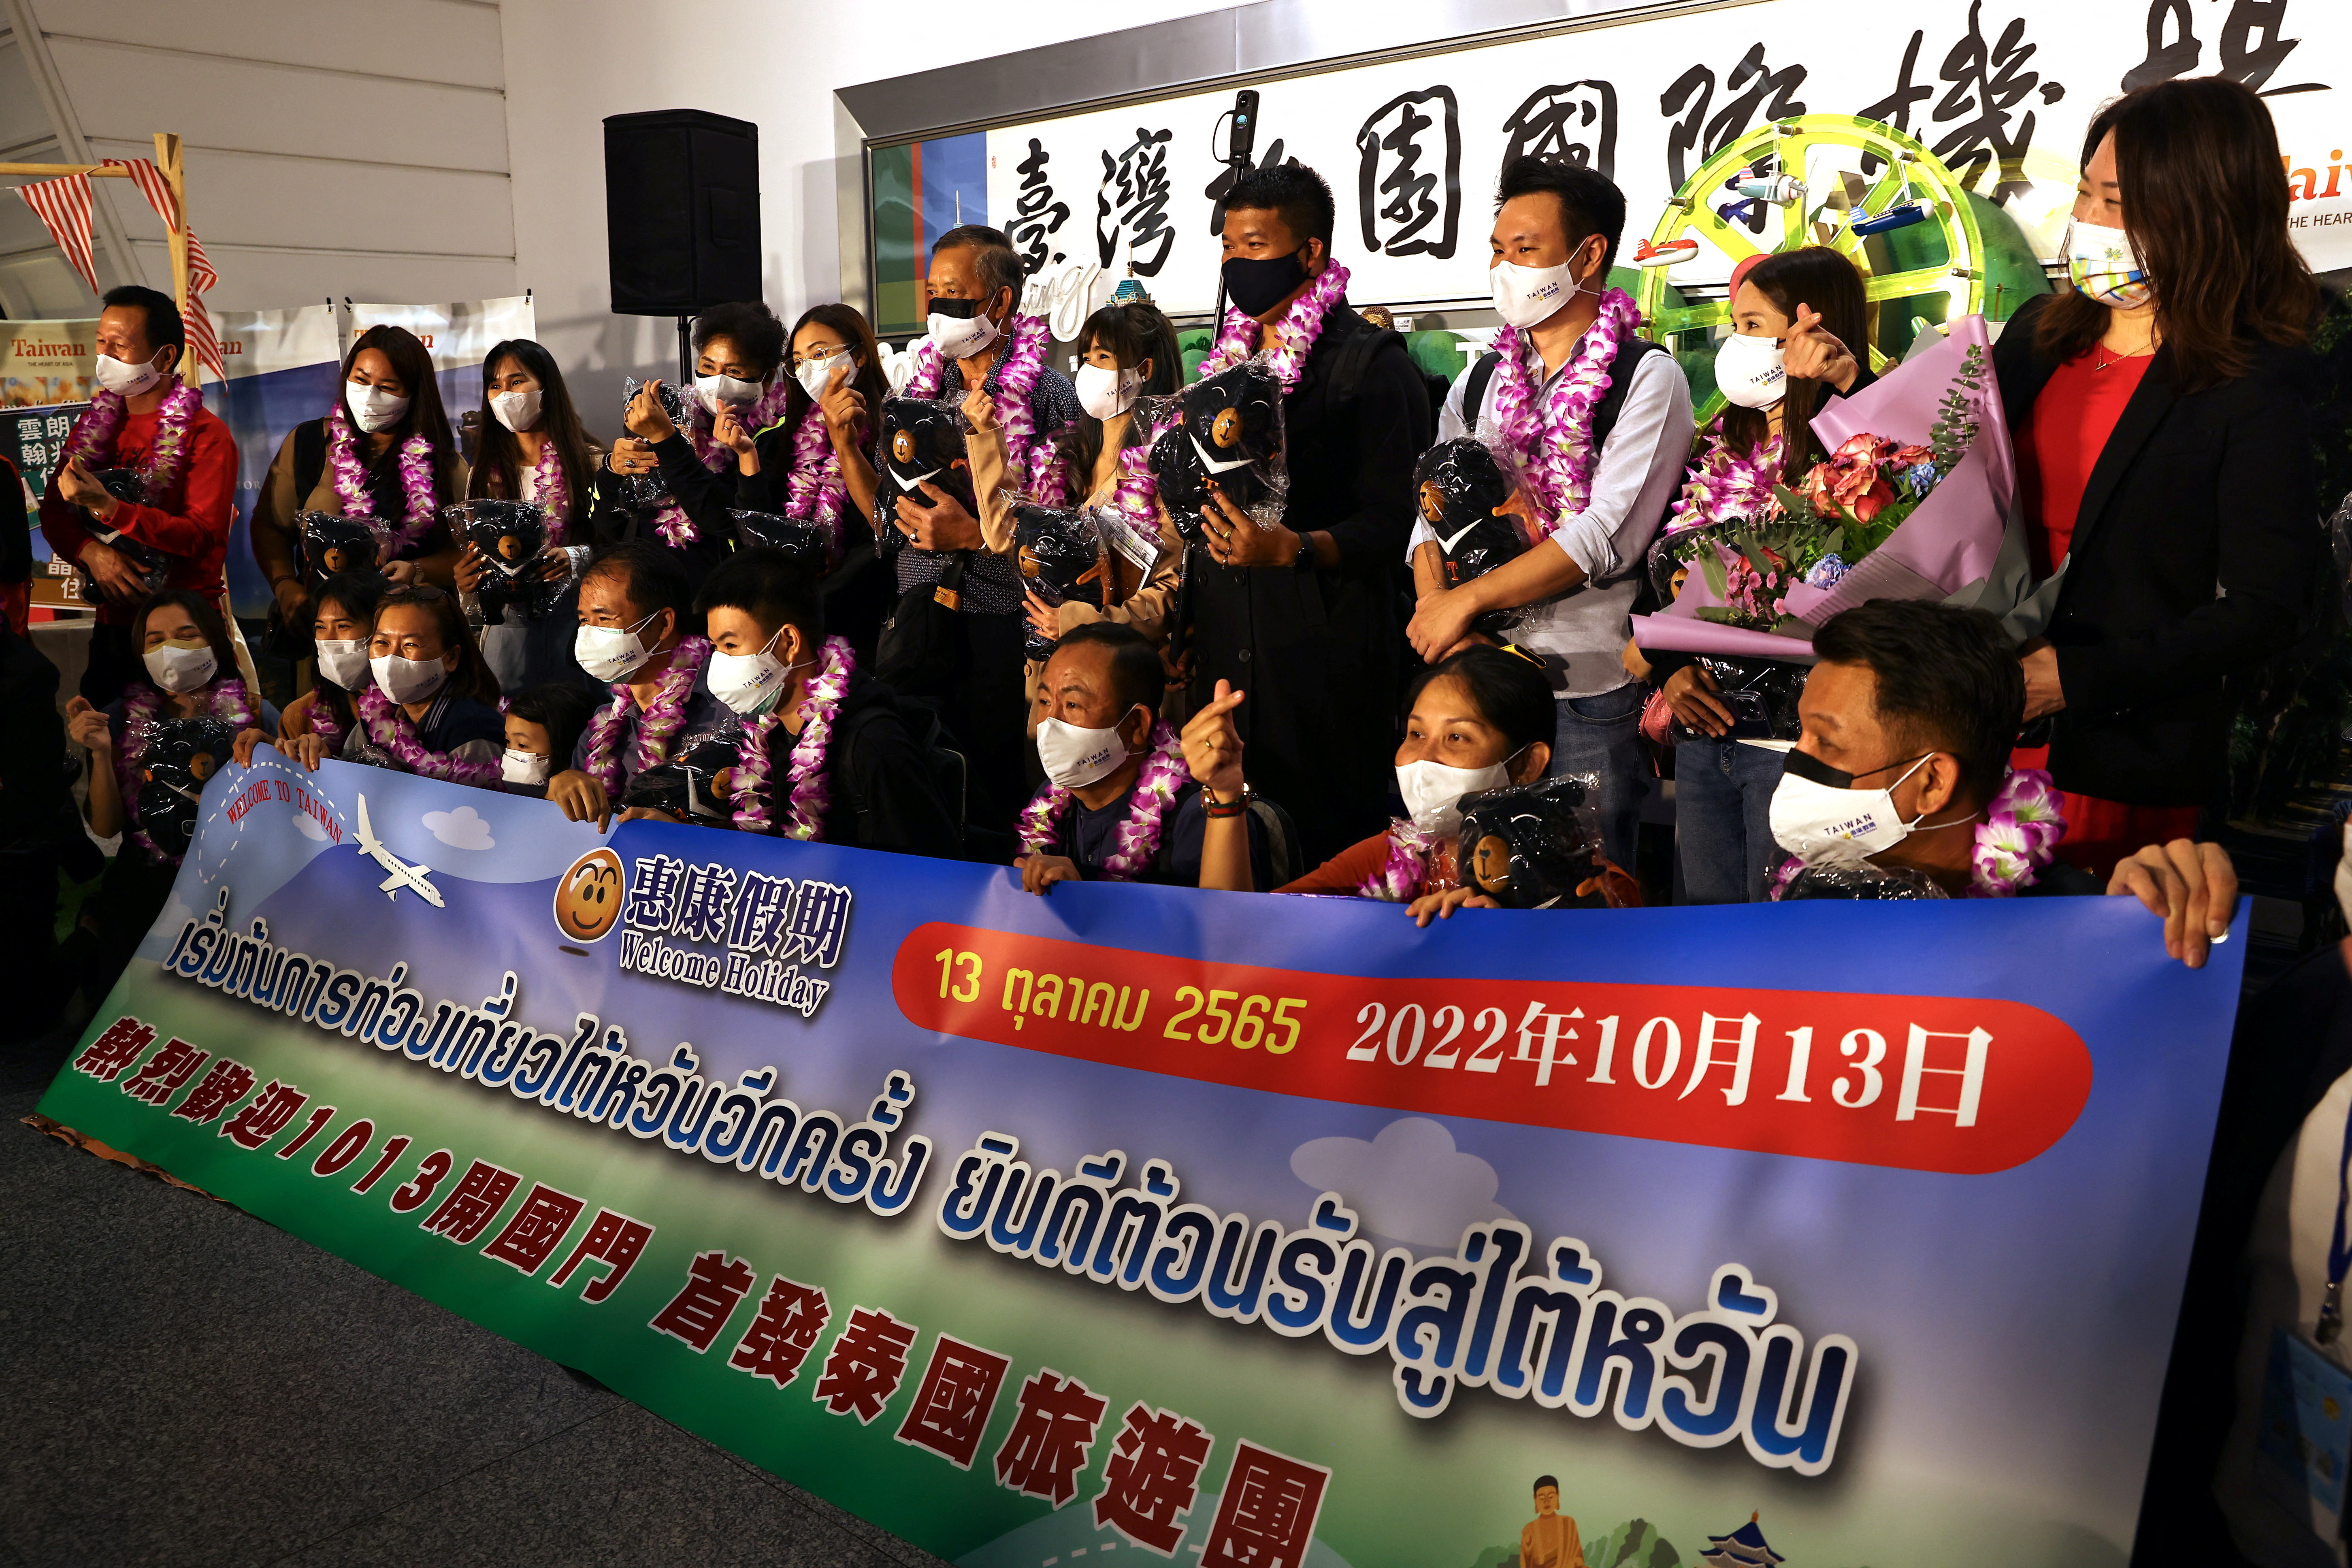 Travellers from Thailand on the first quarantine-free flight to Taiwan, amid the coronavirus disease (COVID-19) pandemic, pose for a group photo at the airport in Taoyuan